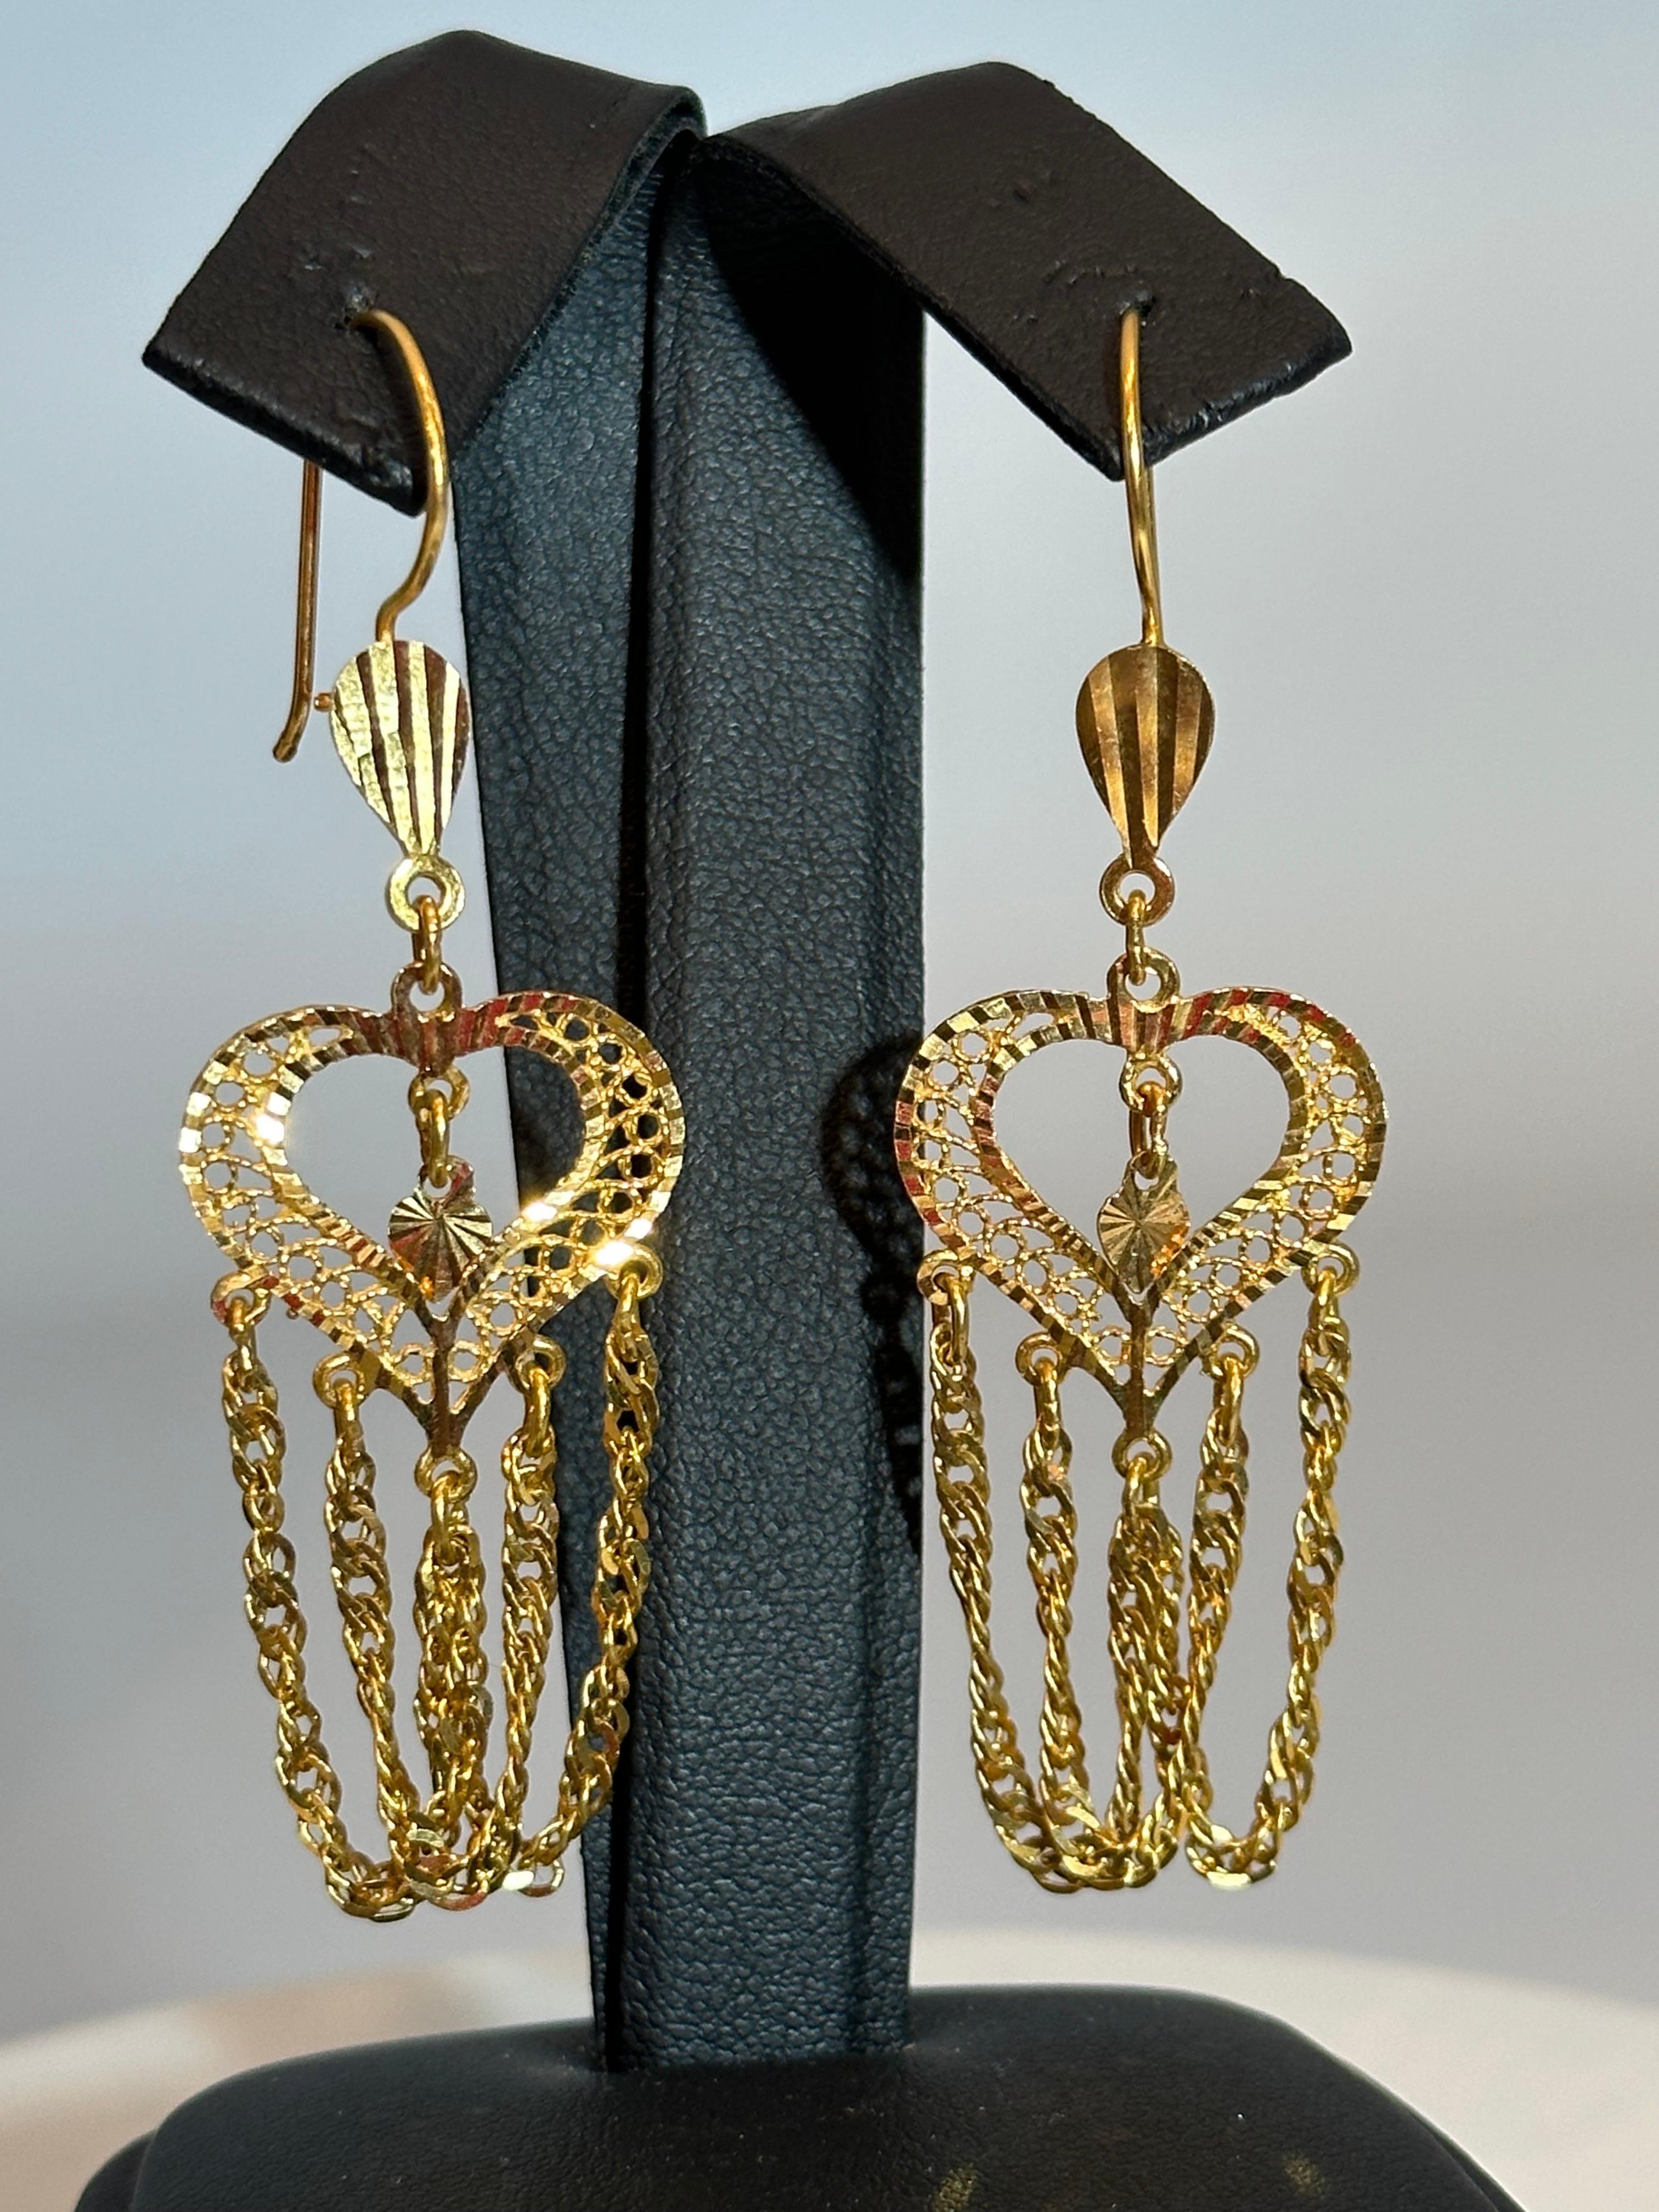 Vintage 21 Kt Yellow Gold 7.5 Gm Heart Dangling Earrings, 2.6 Inch Long
Beautiful Dangling heart earring 
Weight of the 1 Karat gold is 7.5 gm 
 pure gold
Stamped 21 K
Made in Thailand
Please look at all the pictures
Its very hard to capture the